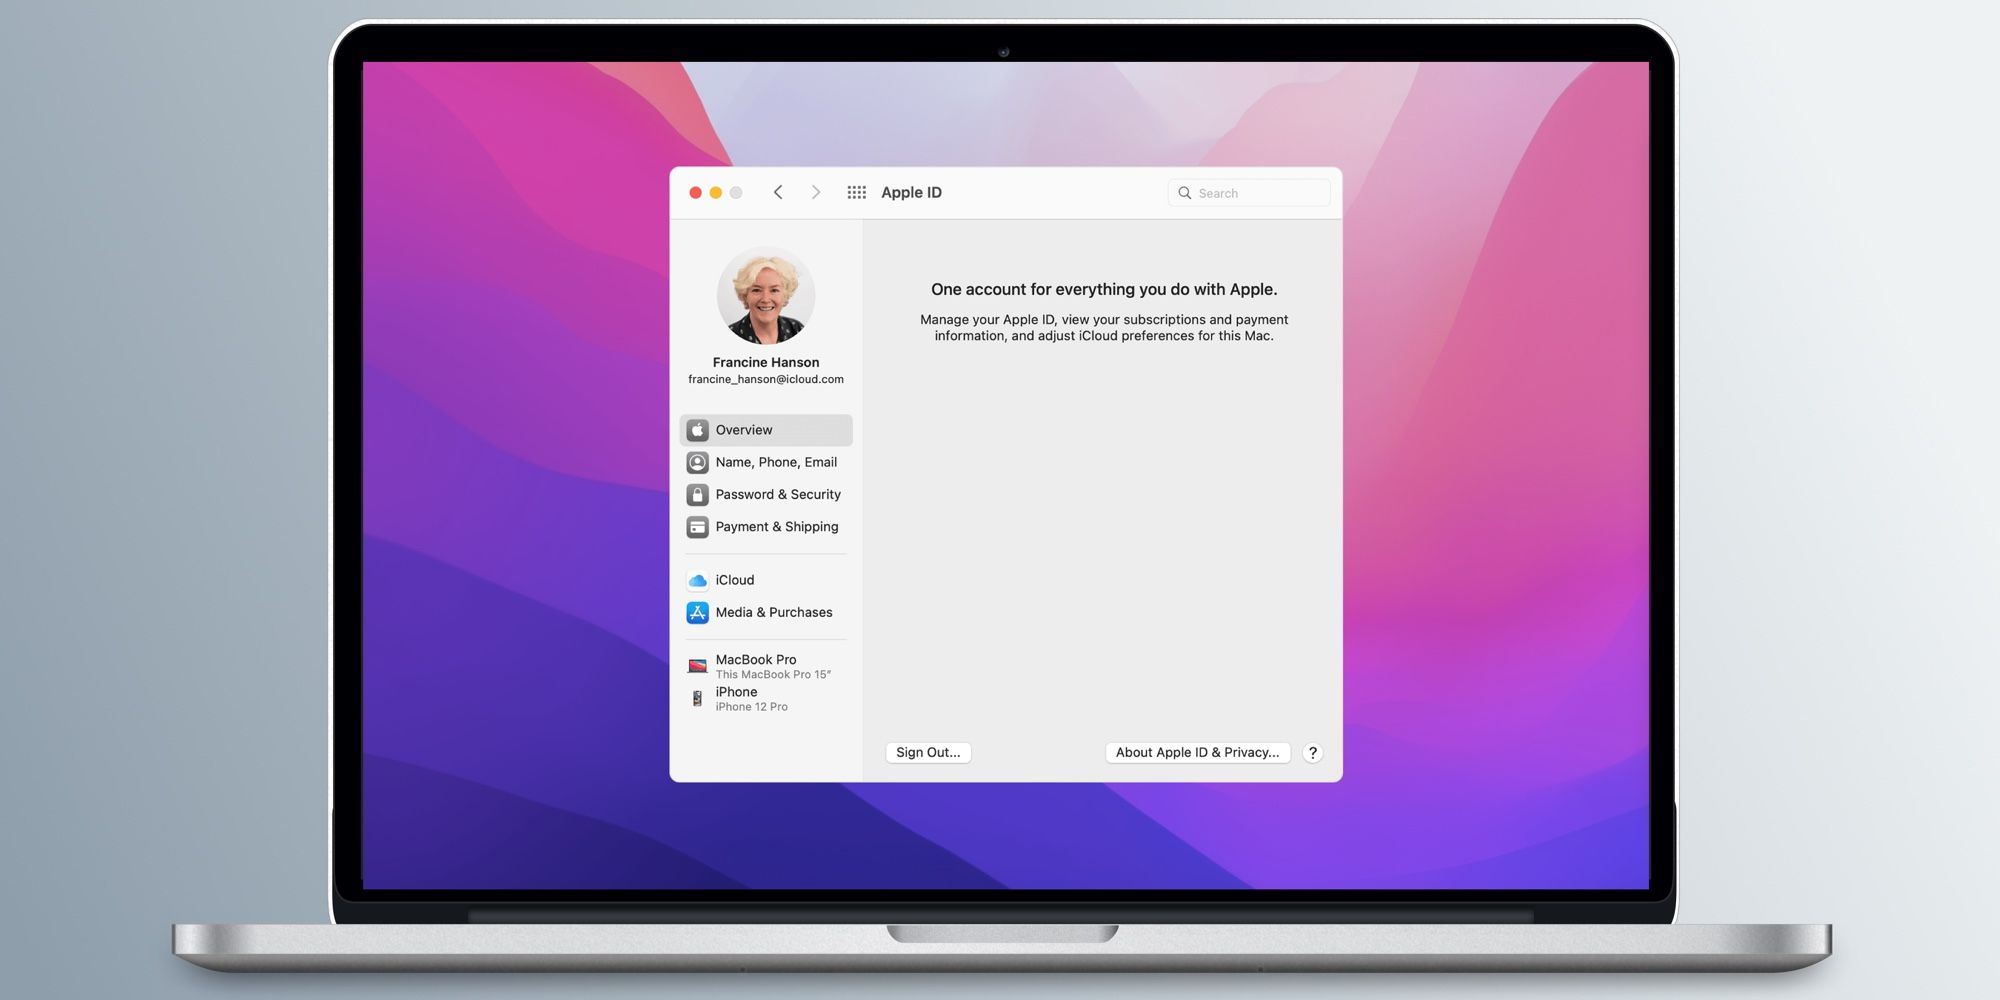 How to sign out of iCloud on Mac